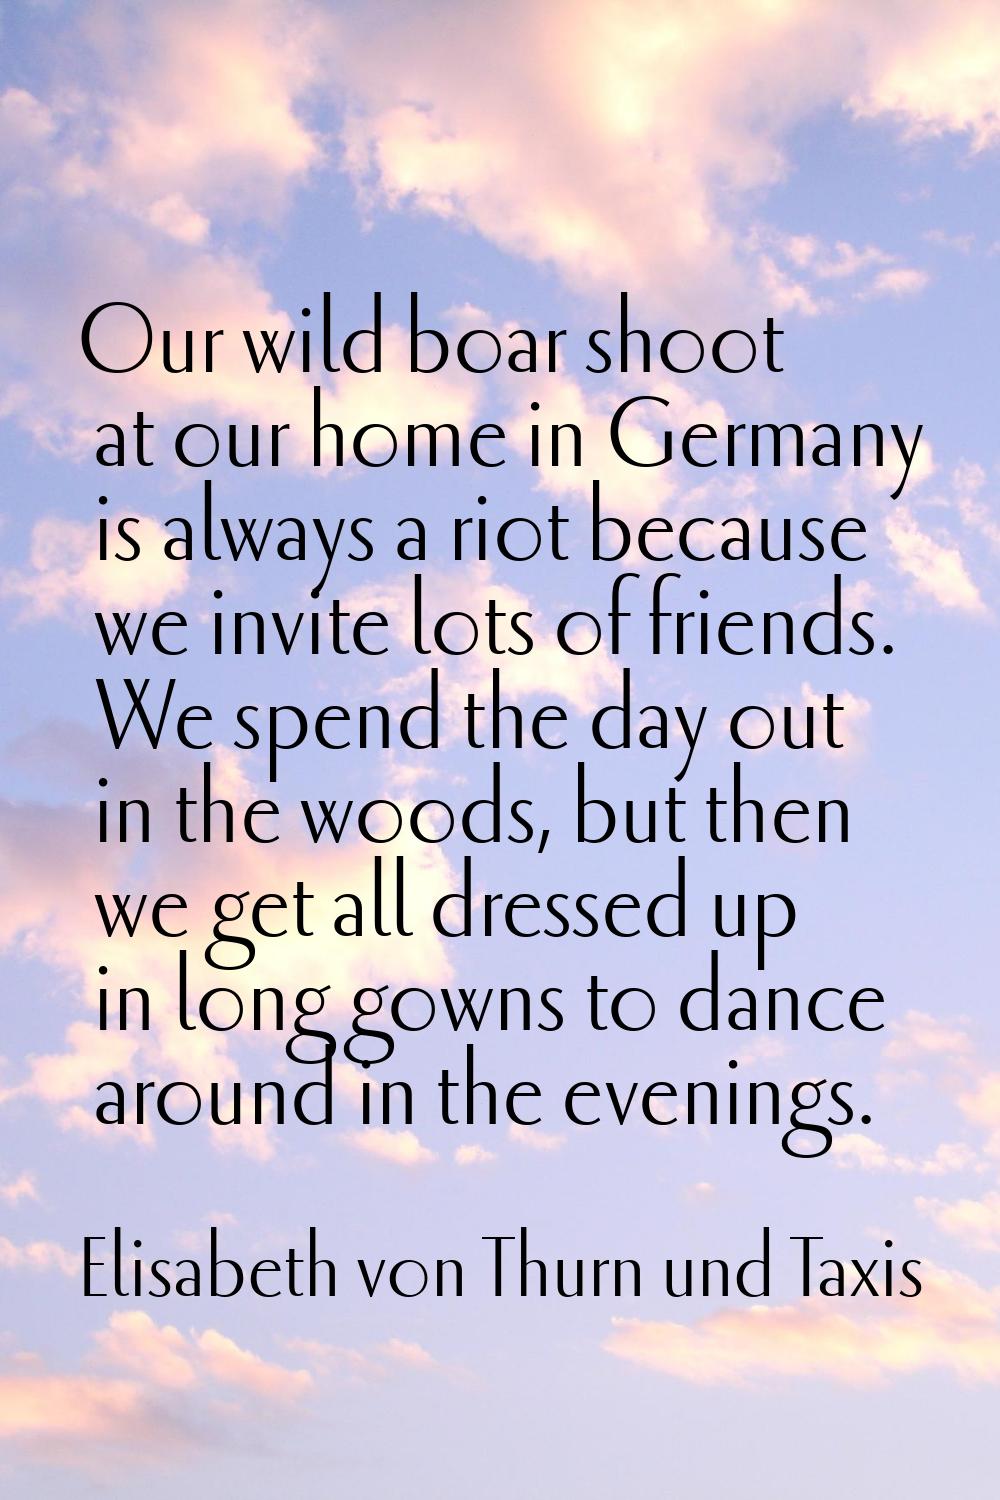 Our wild boar shoot at our home in Germany is always a riot because we invite lots of friends. We s